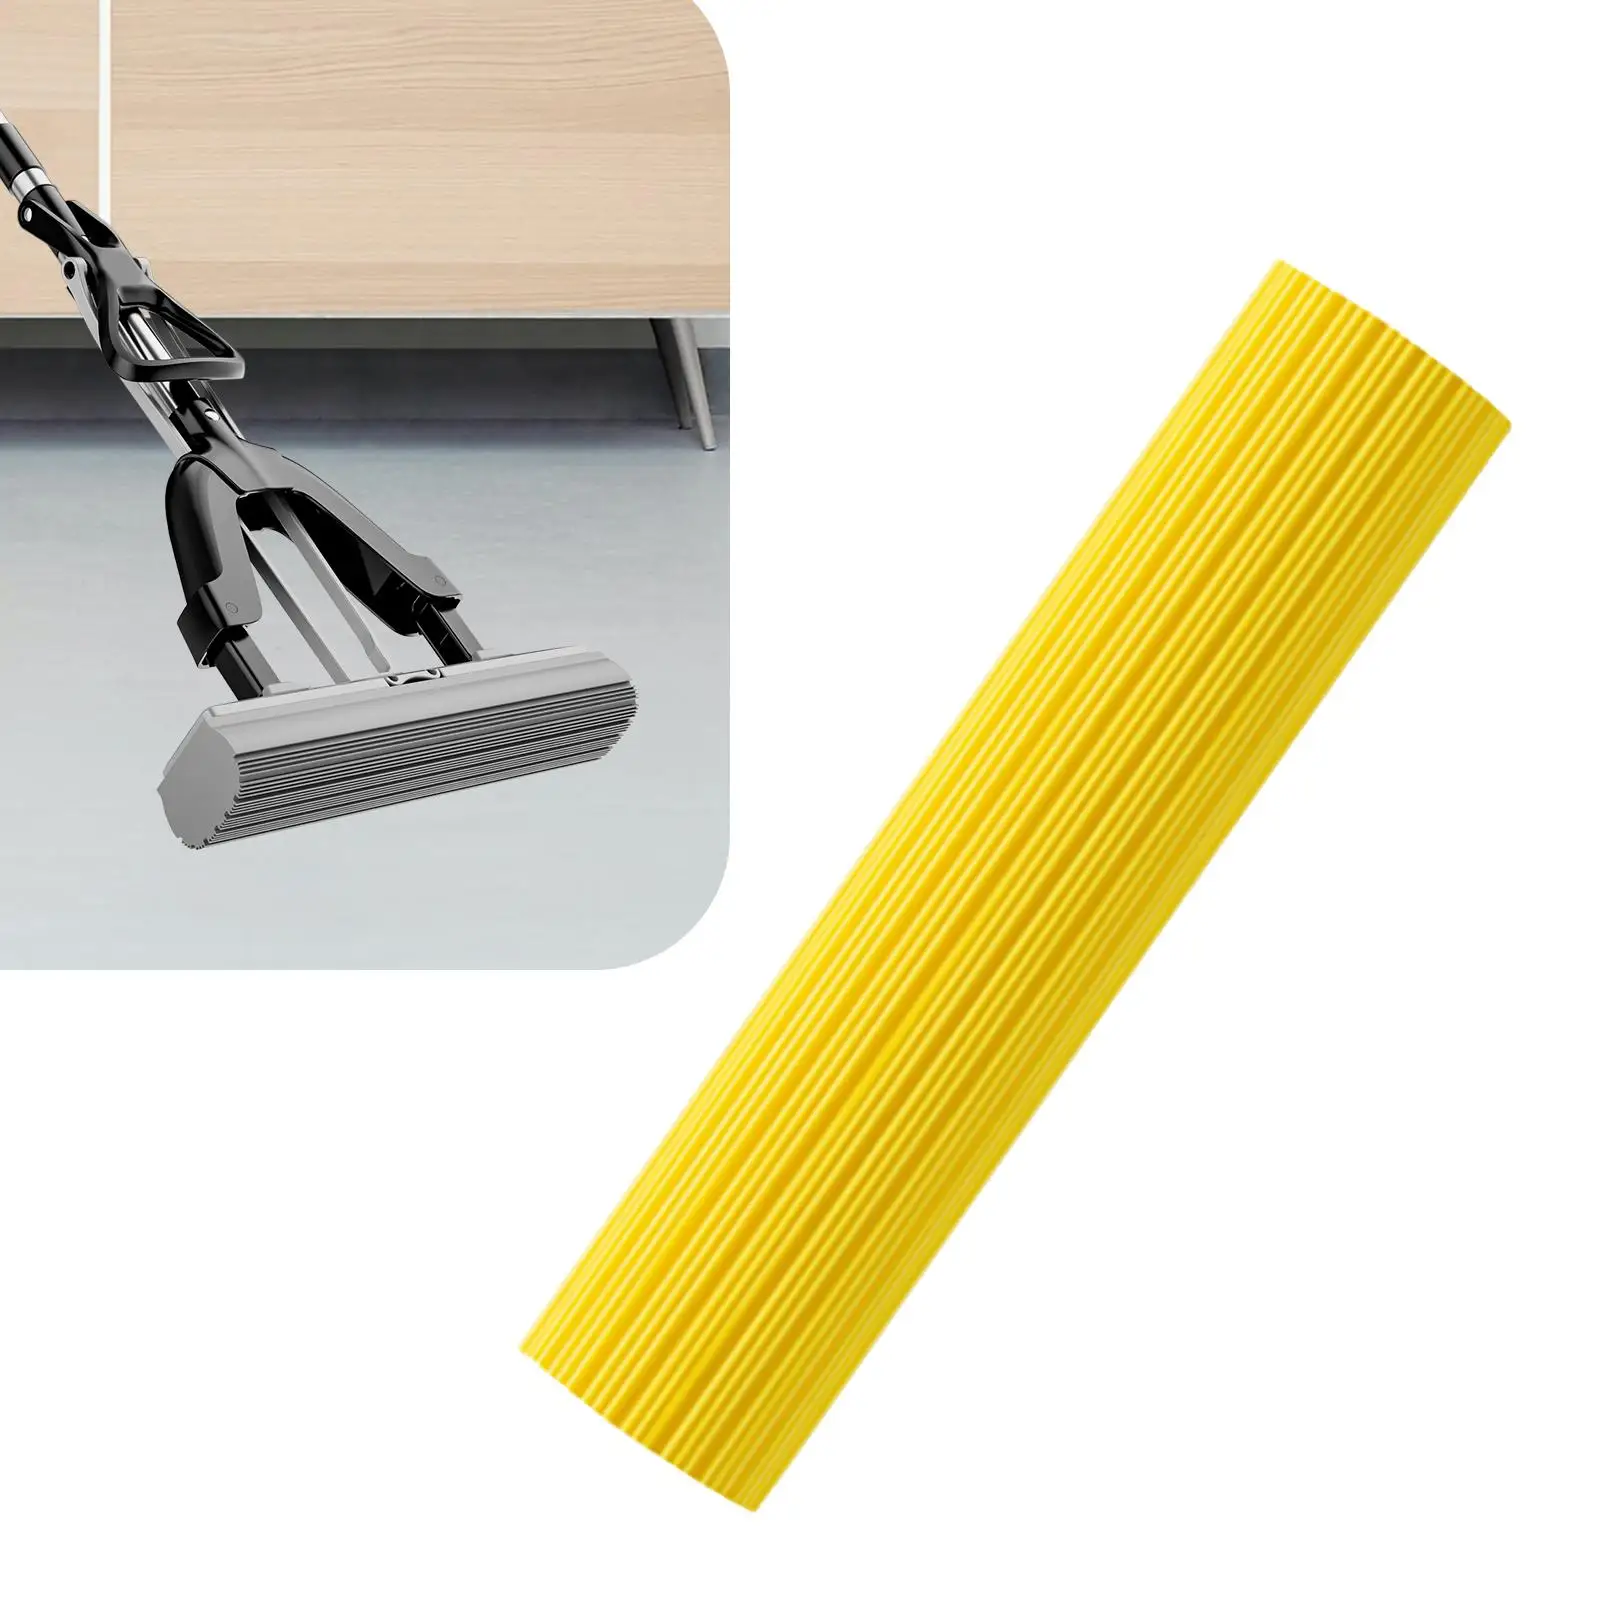 Sponge Roller Mop Head Refills Washable Strong Absorbent Reusable Mop Head for Bathroom Kitchen Home Office Glass